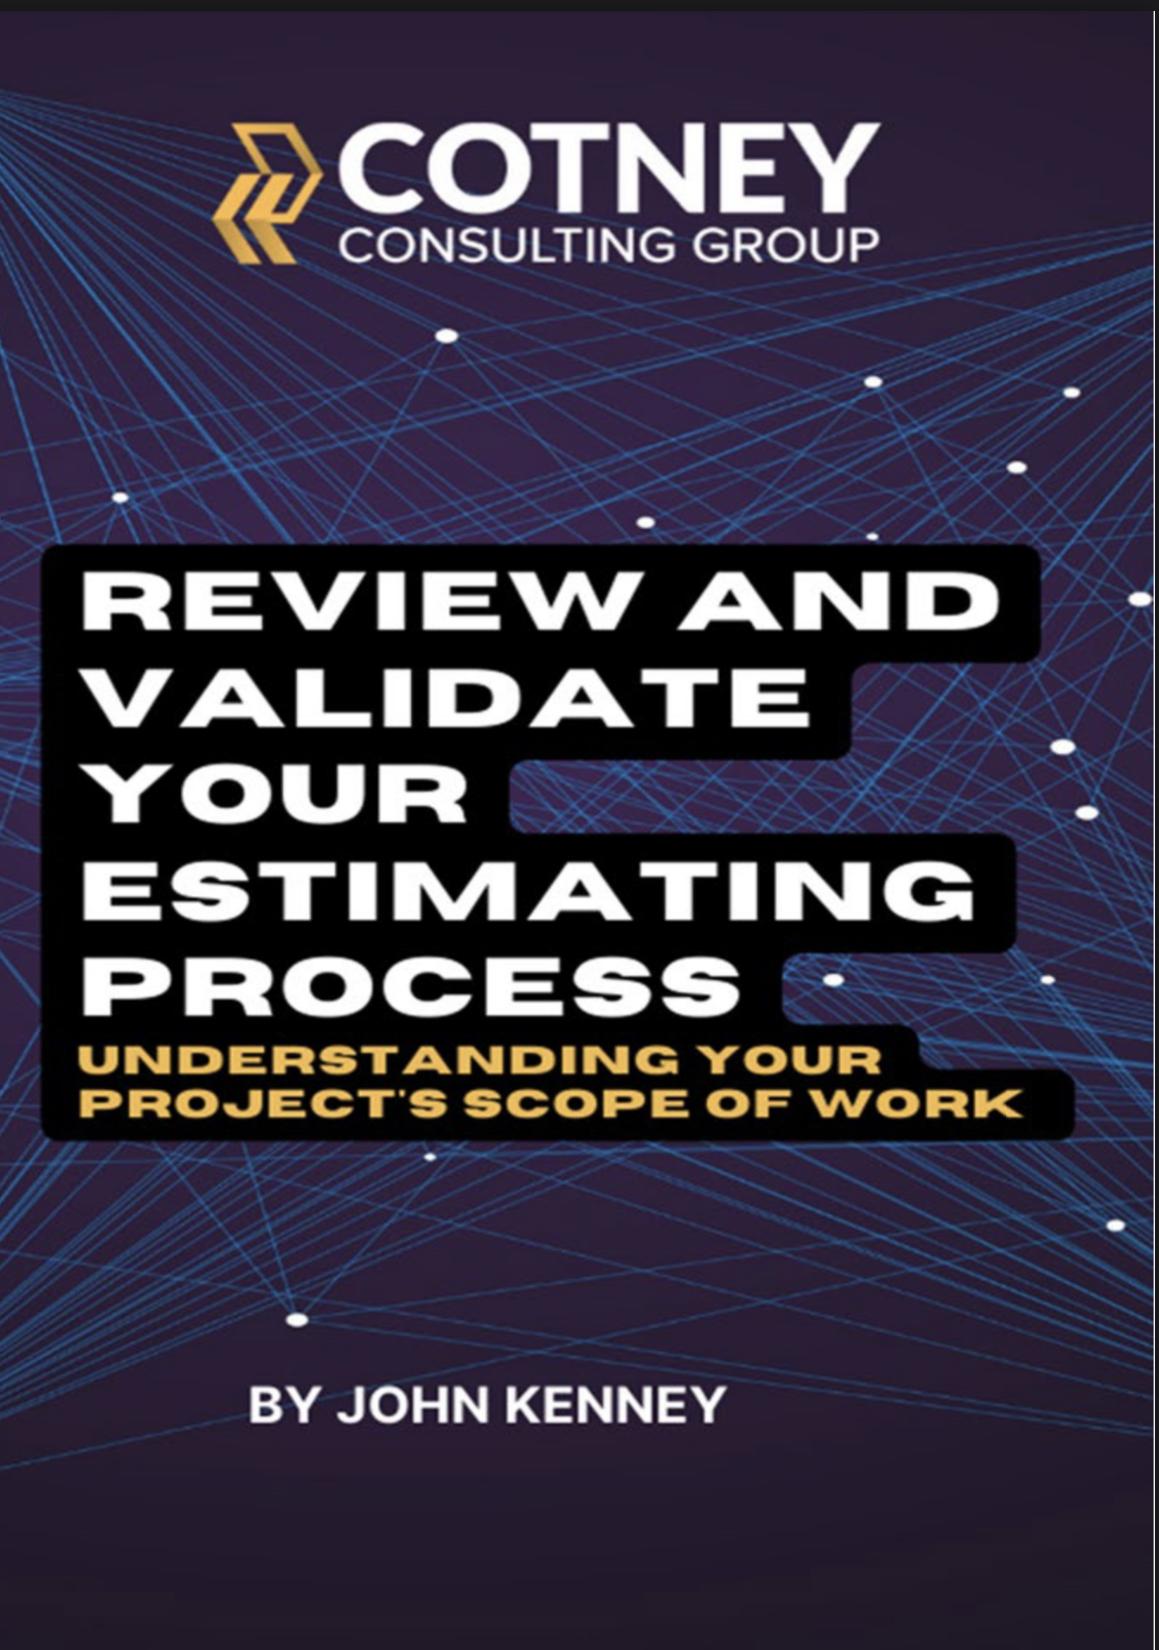 Cotney Consulting Group - Review and Validate Your Estimating Process eBook